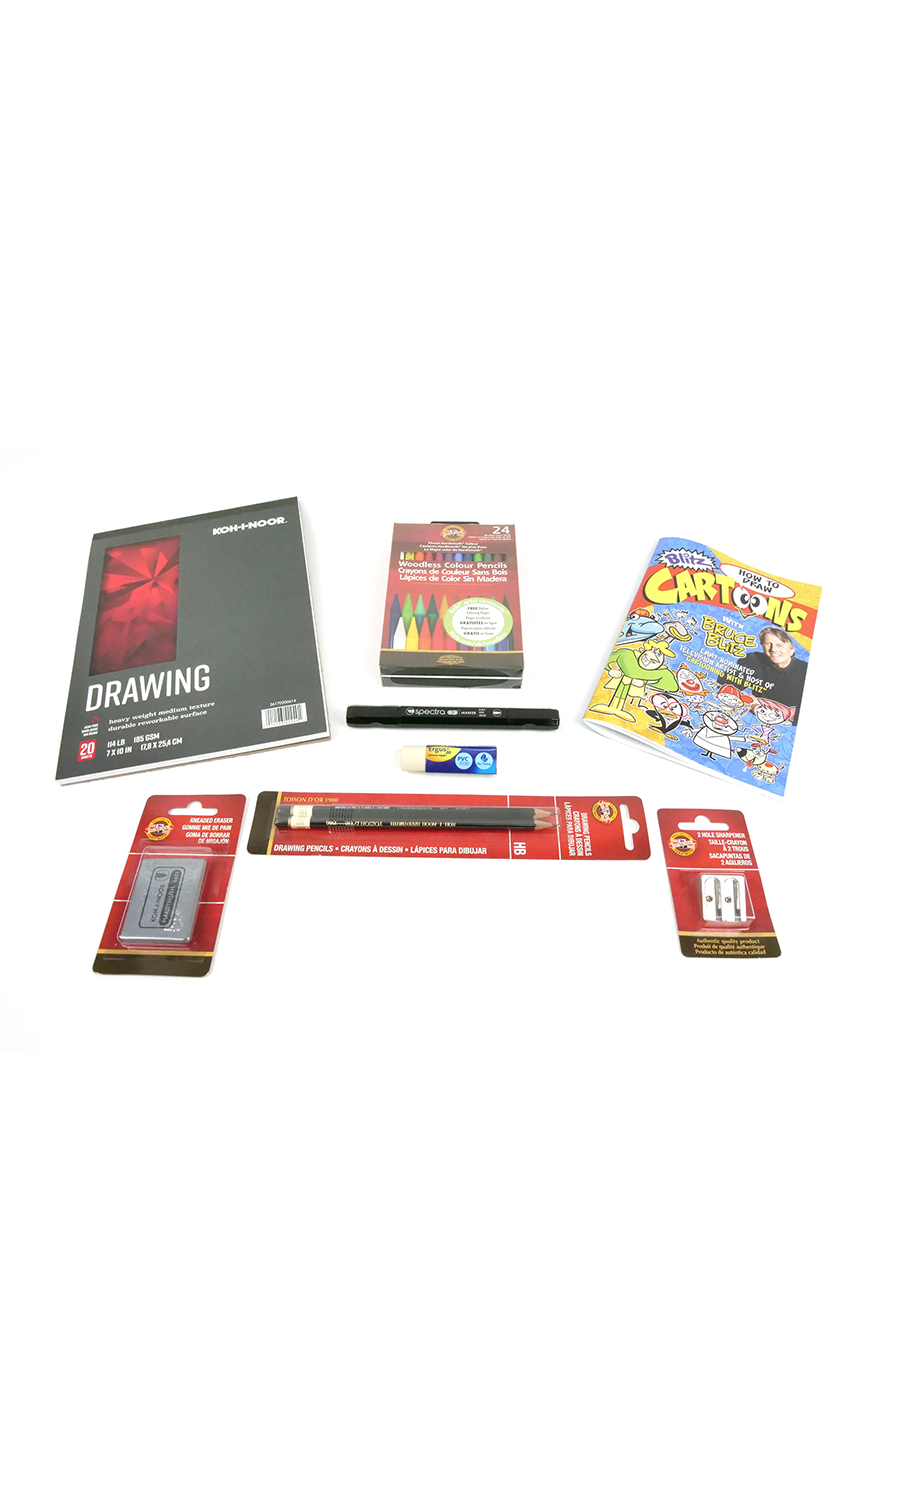 Bruce Blitz Drawing Set - "How to draw cartoons"